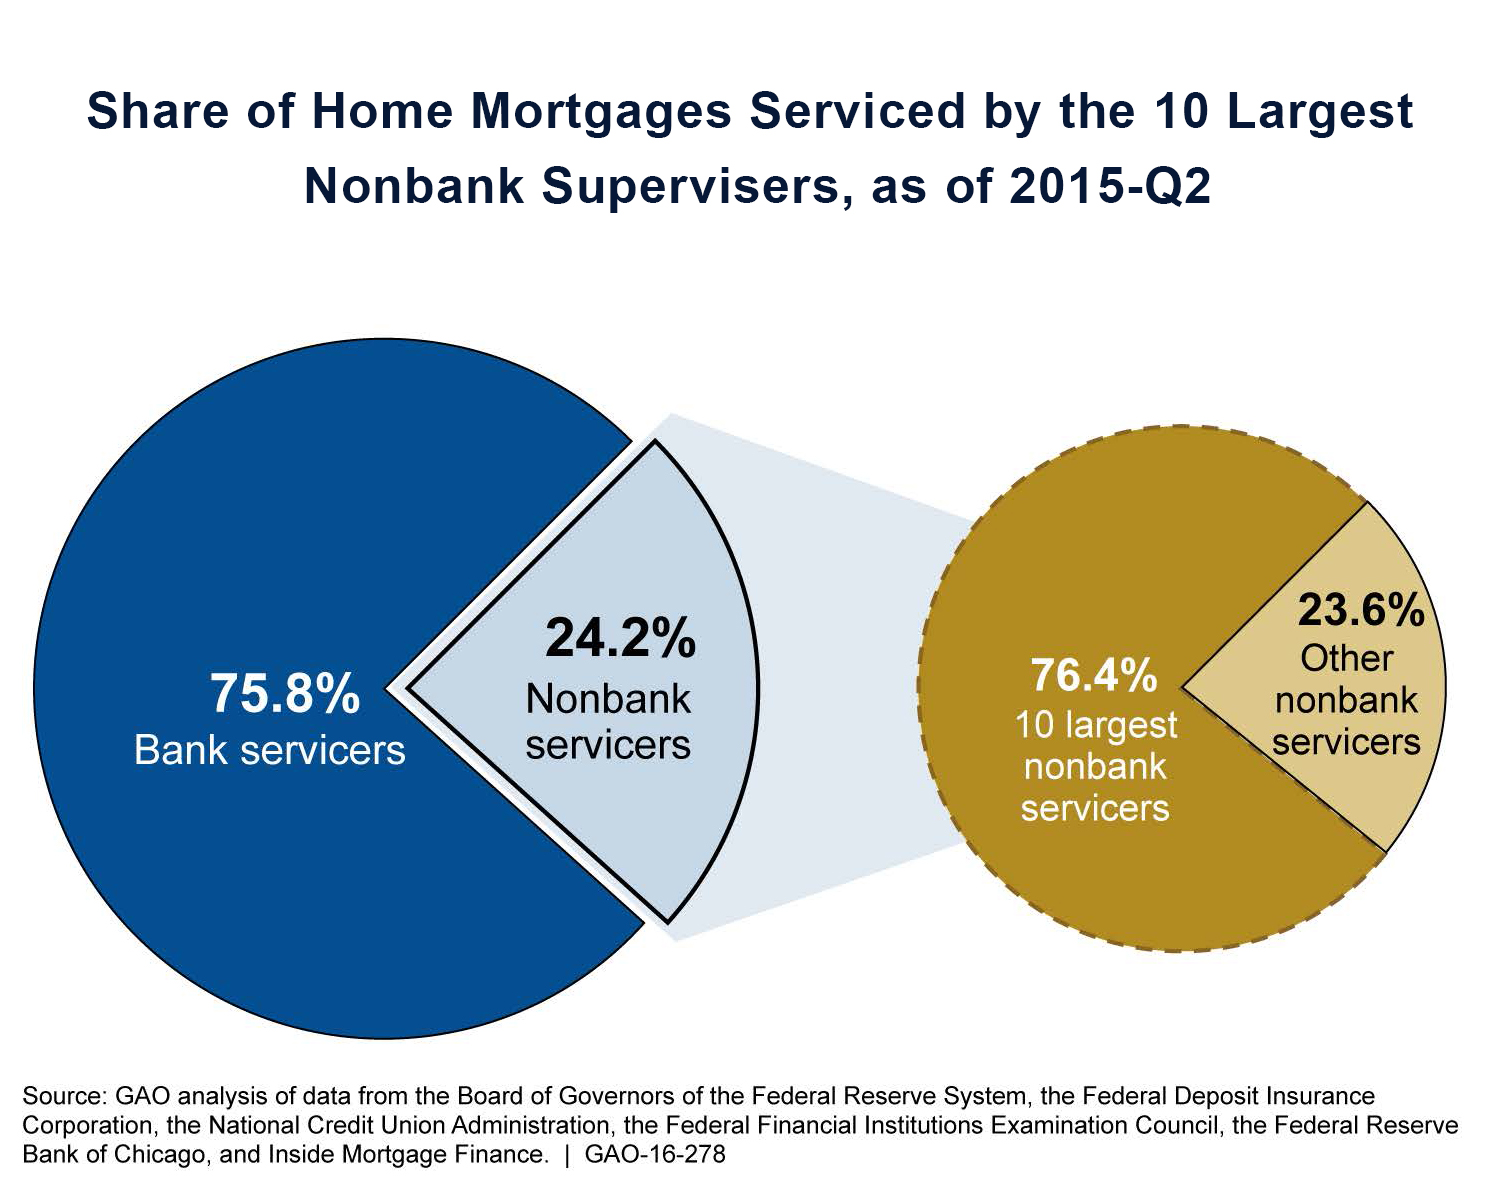 GAO-16-278, Nonbank Mortgage Servicers- Existing Regulatory Oversight Could Be Strengthened.jpg